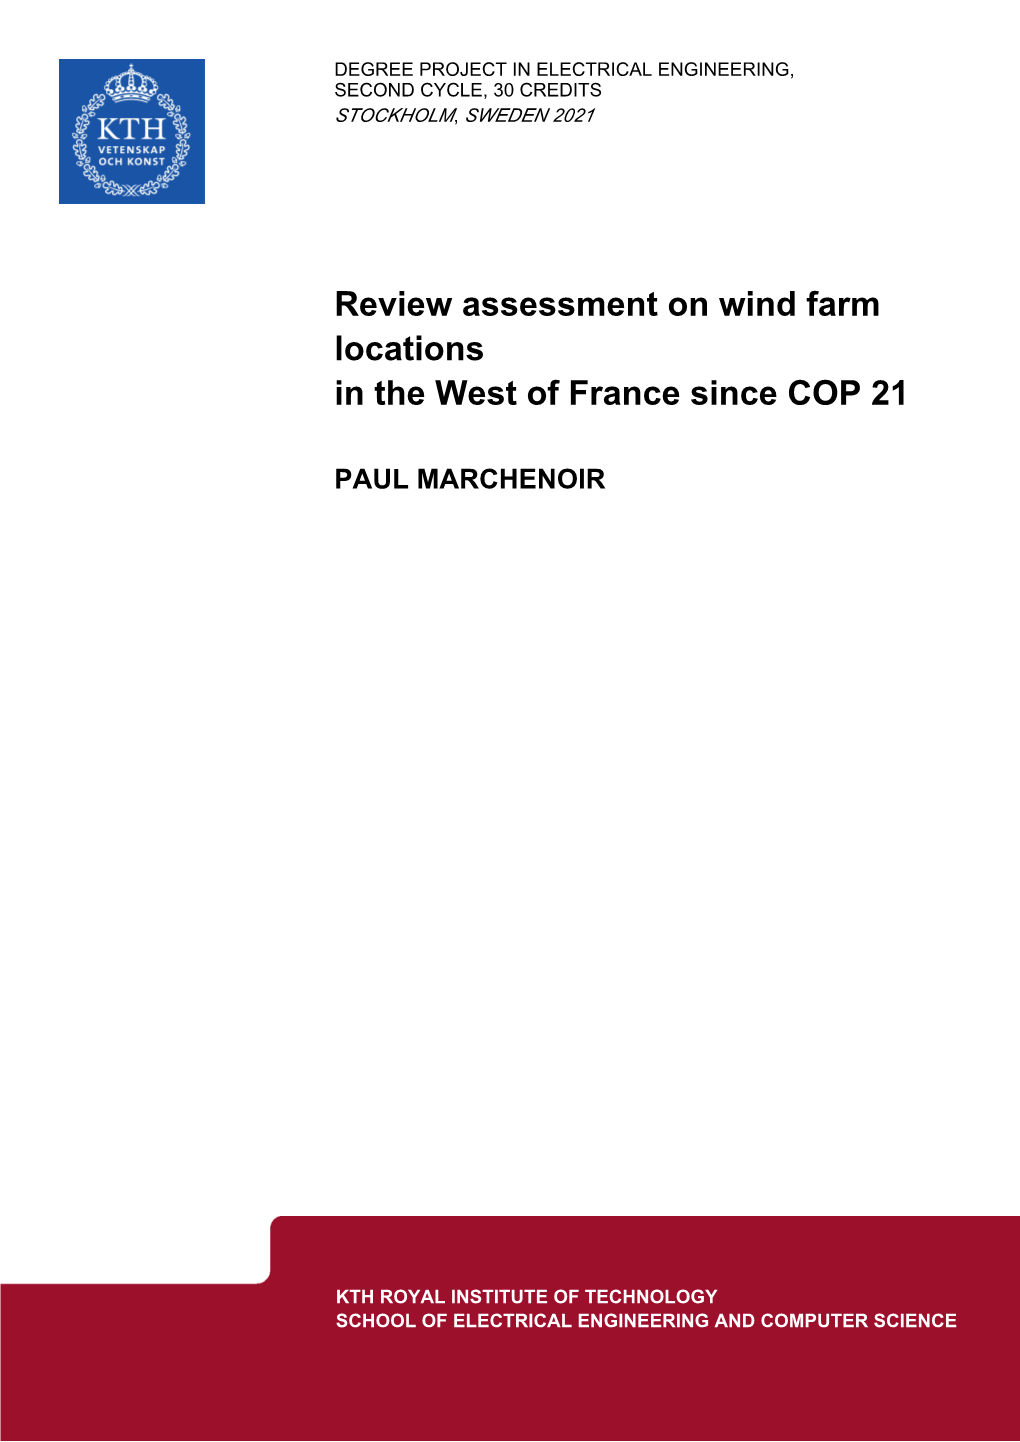 Review Assessment on Wind Farm Locations in the West of France Since COP 21